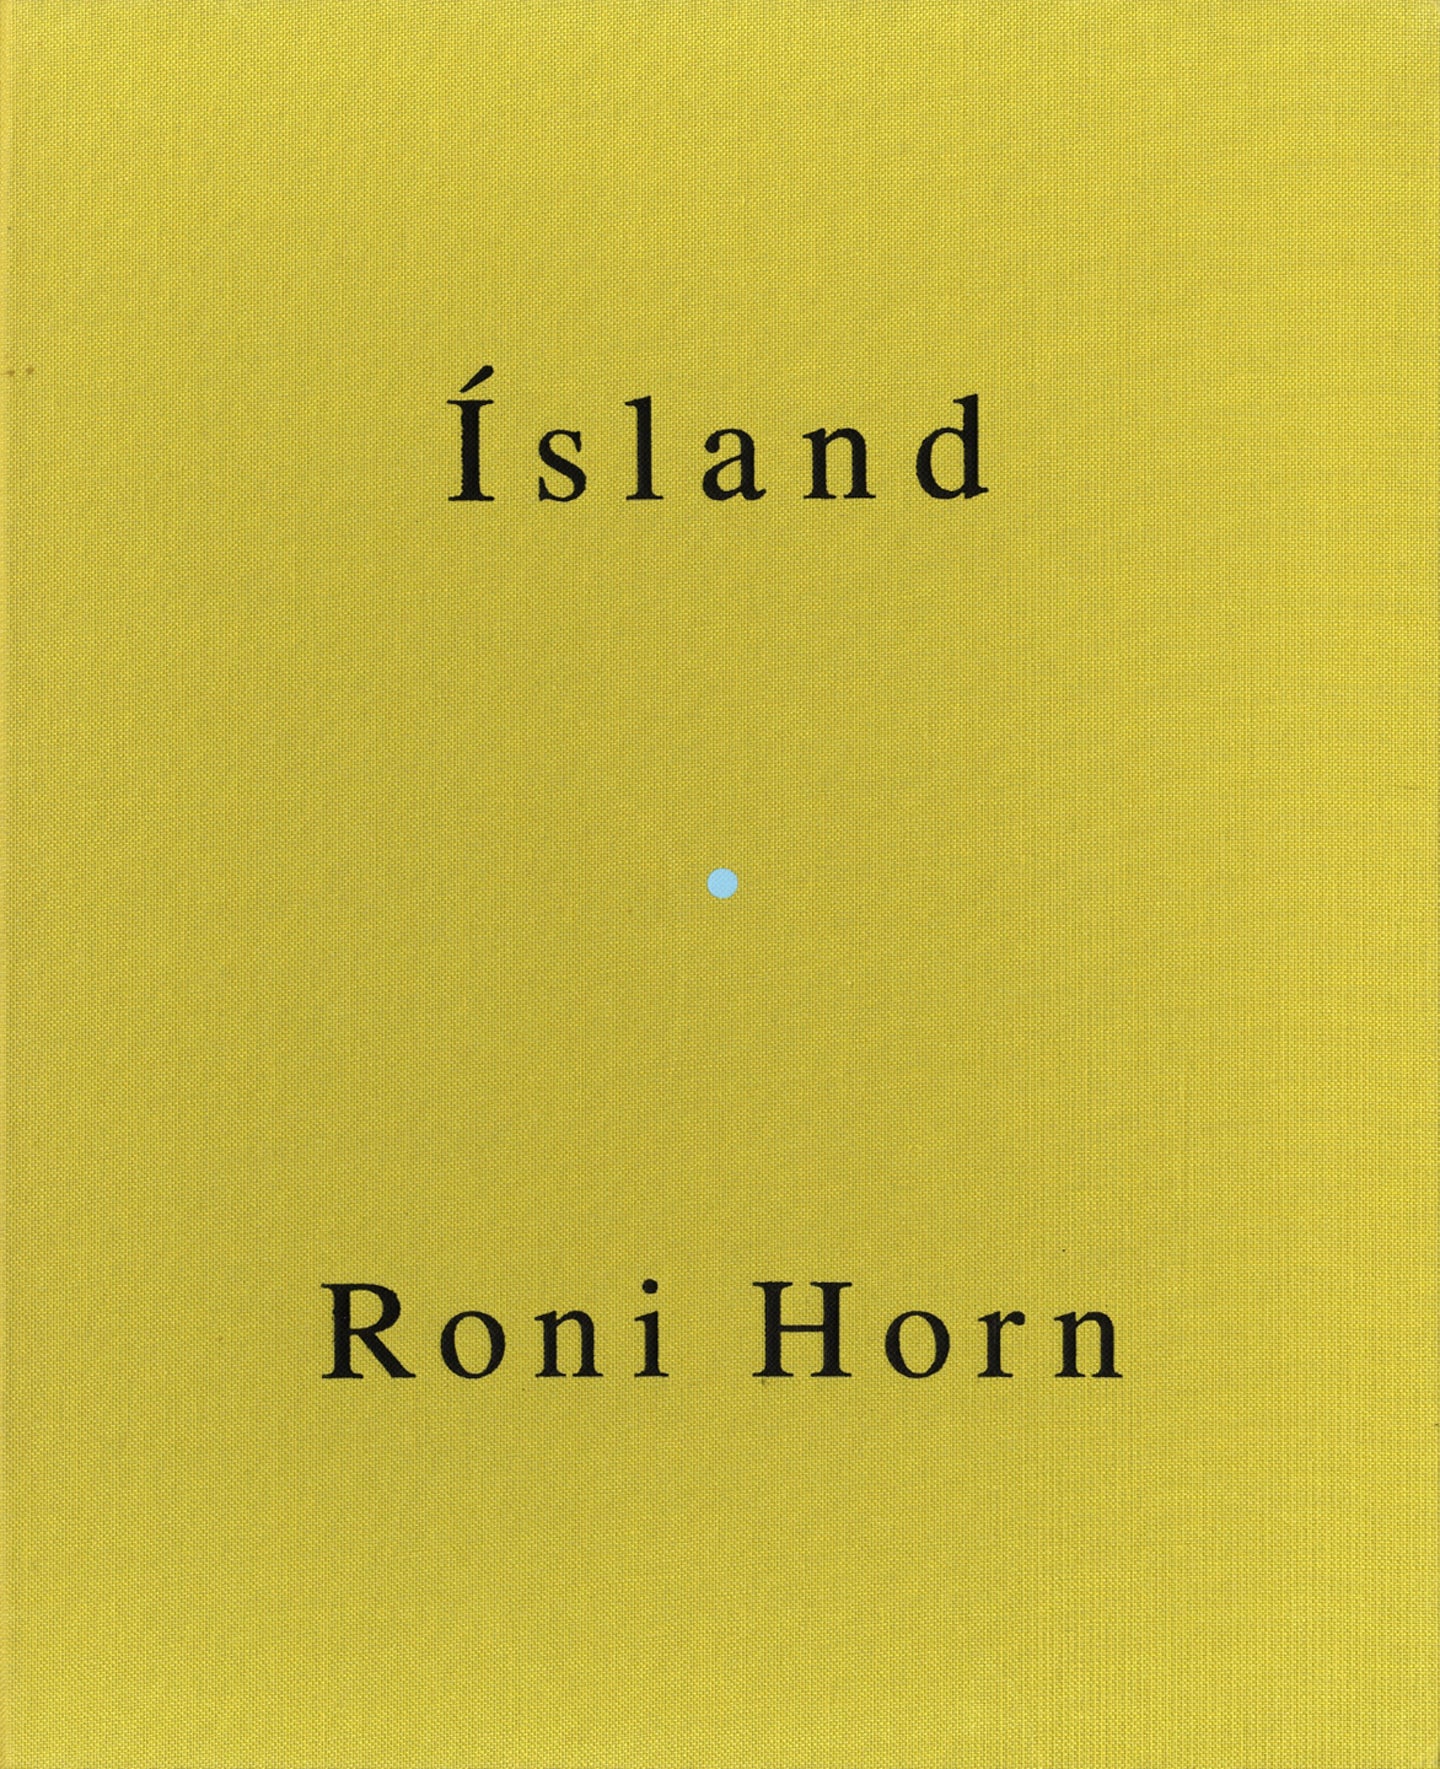 Roni Horn: Ísland (Iceland): To Place 1-11 (Complete Set, with Inner Geography supplement) [all titles SIGNED, all in AS NEW Condition]: 1) Bluff Life; 2) Folds; 3) Lava; 4) Pooling Waters (2 volumes); 5) Verne's Journey; 6) Haraldsdóttir; 7) Arctic Circles; 8) Becoming a Landscape (two volume boxed set); 9) Doubt Box (boxed set); 10) Haraldsdóttir, Part Two; 11) Mother, Wonder; 12) Inner Geography (catalogue supplement)